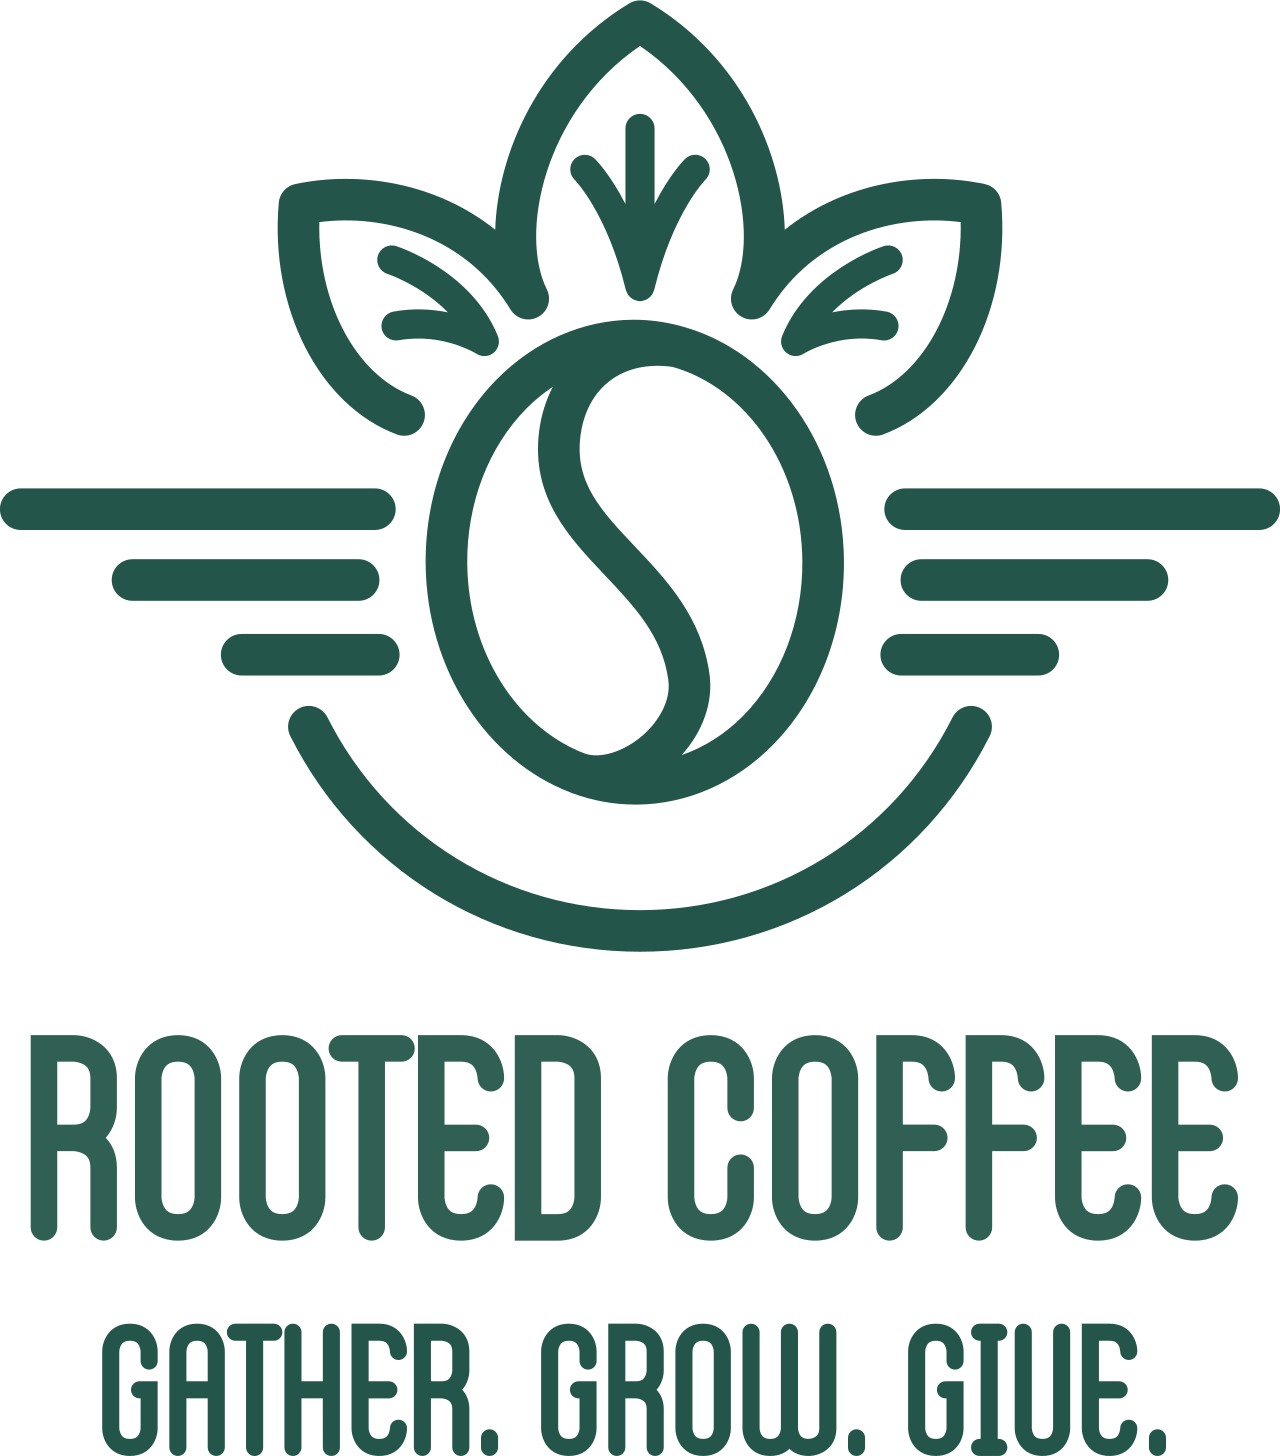 Rooted Coffee's logo